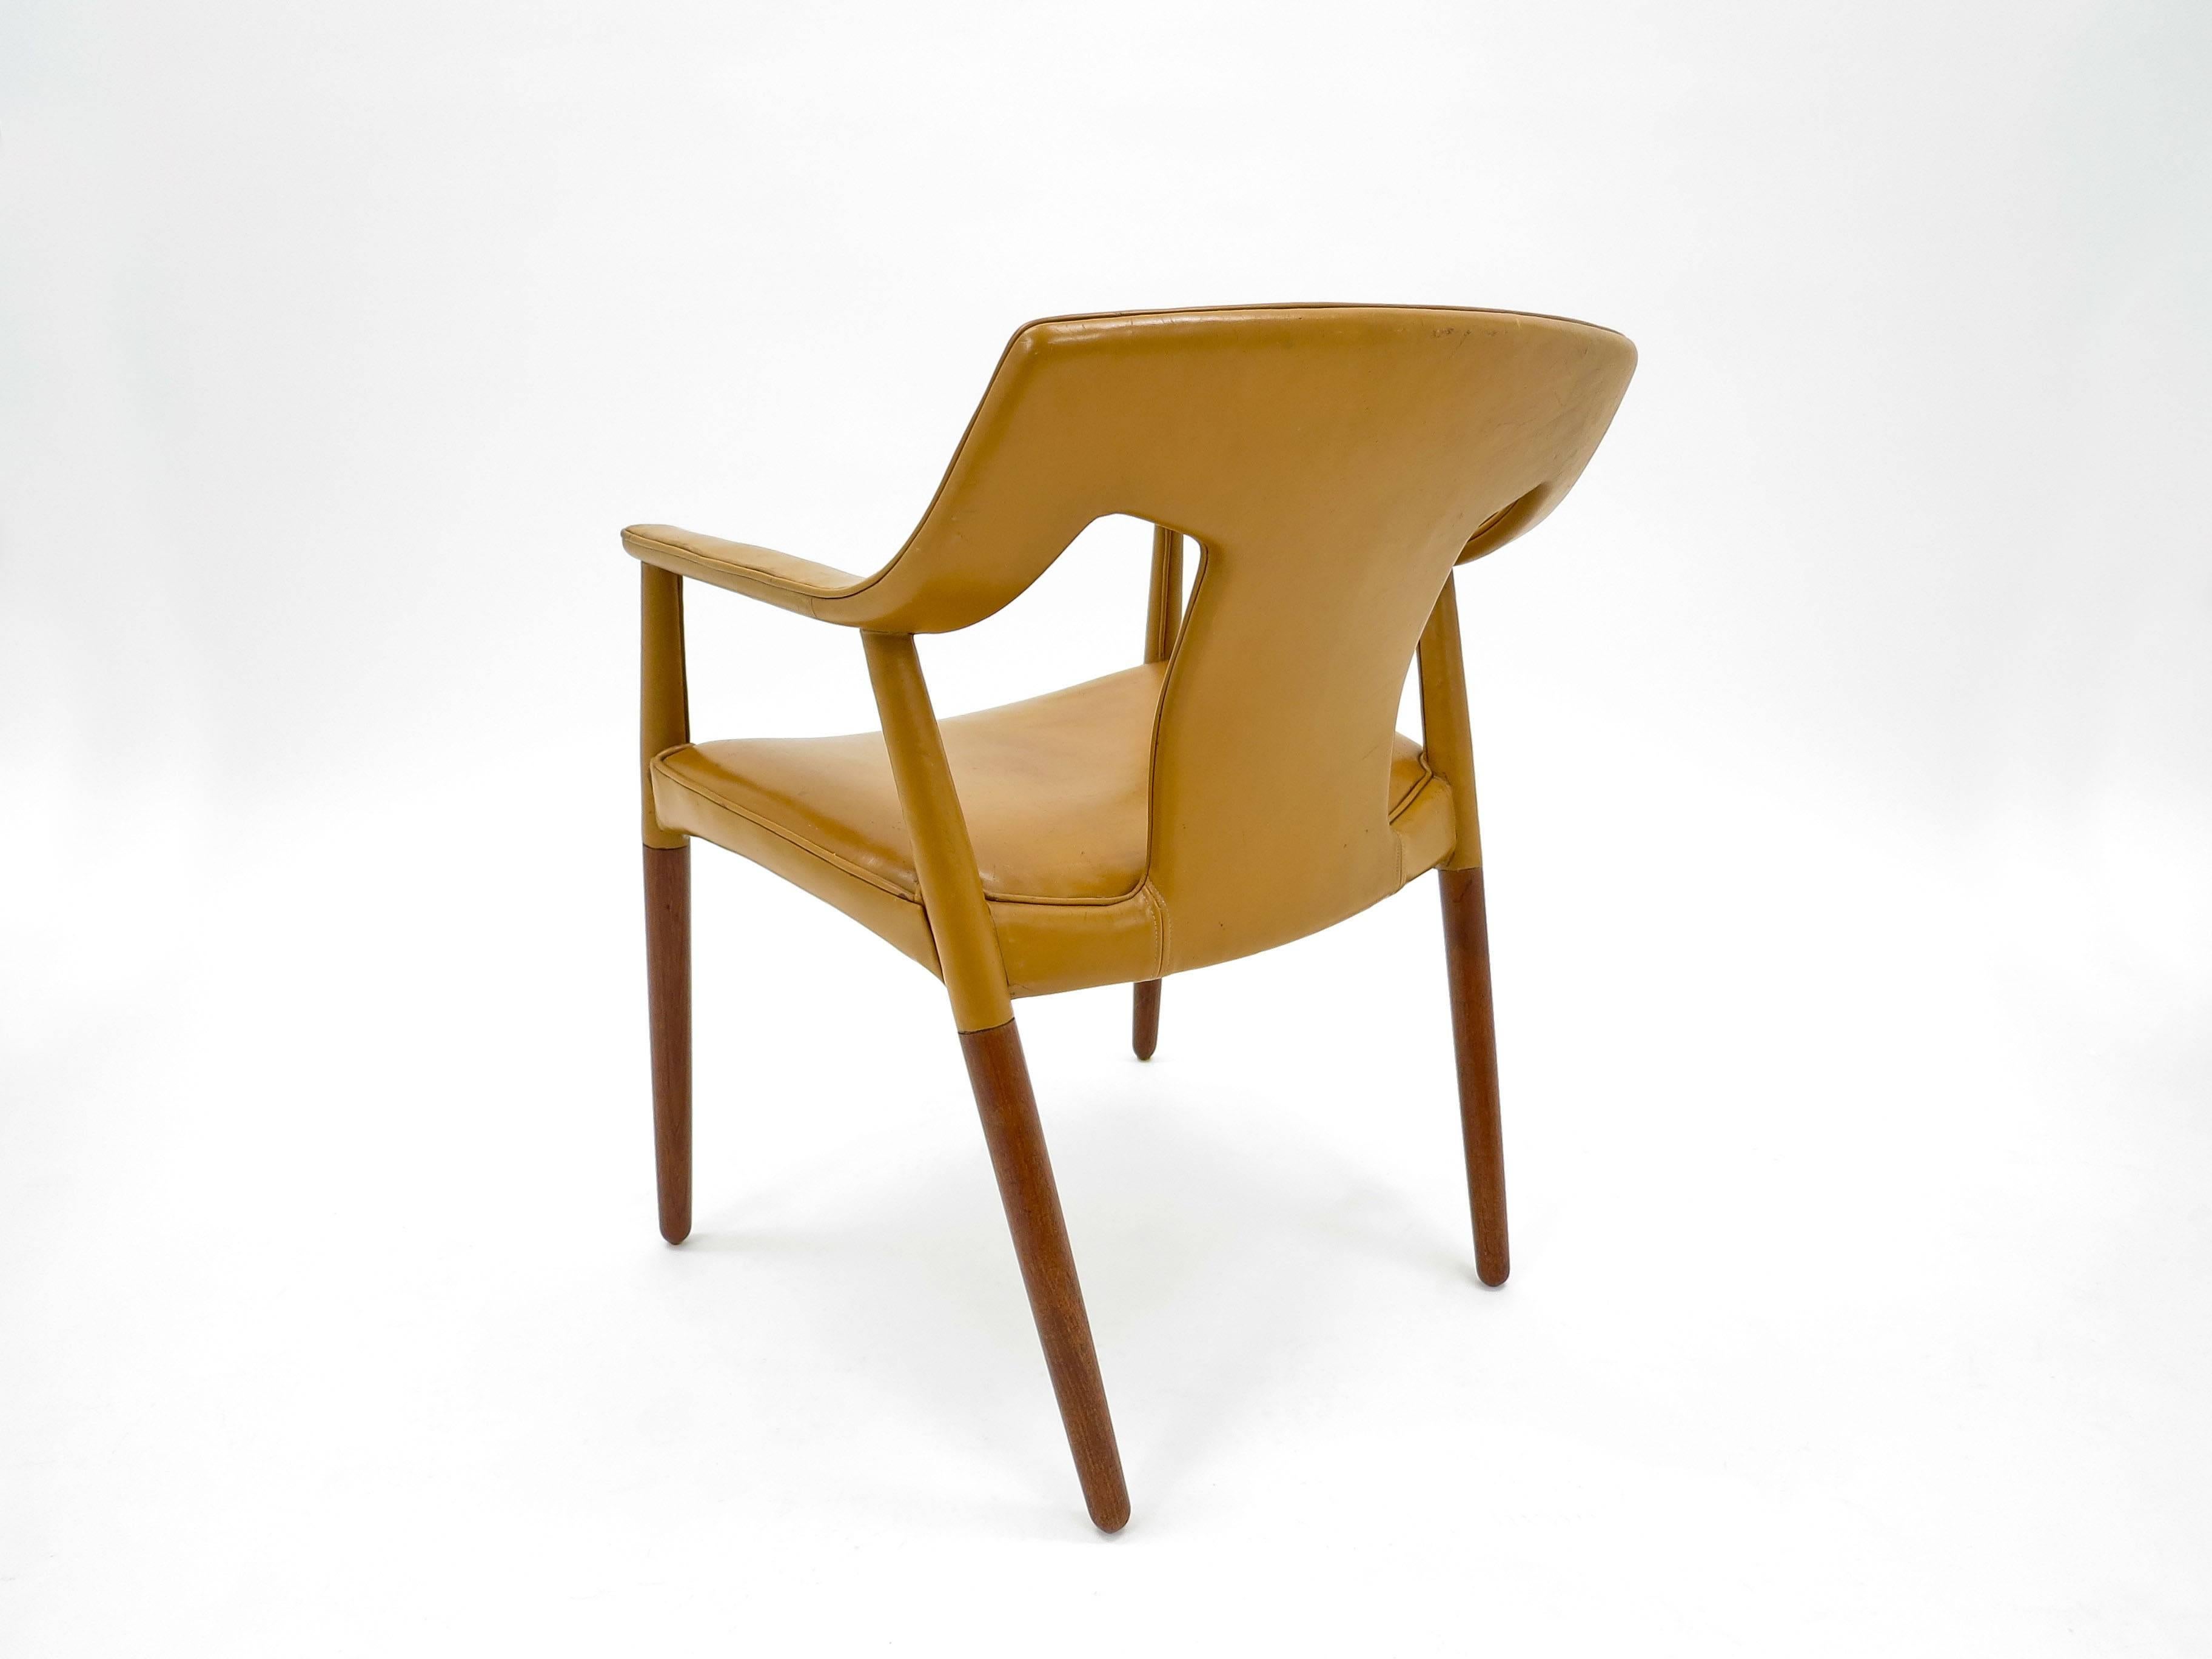 20th Century Bender Madsen and Larsen Armchair Leather and Teak, Danish, 1950s For Sale